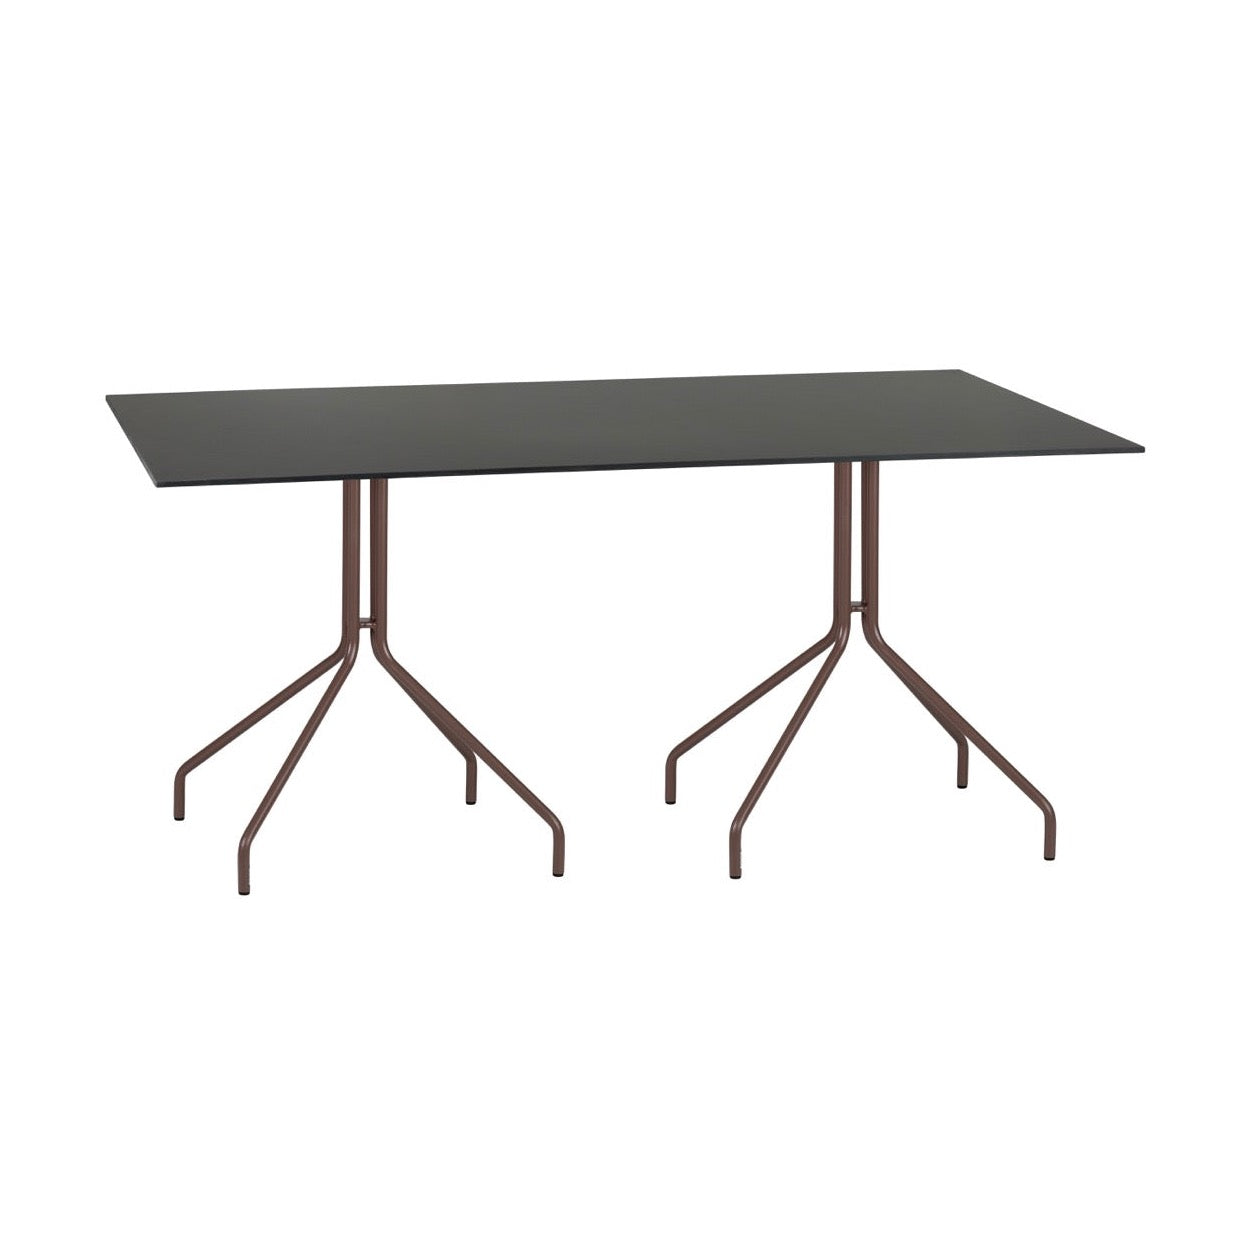 Weave dining table 160 cm